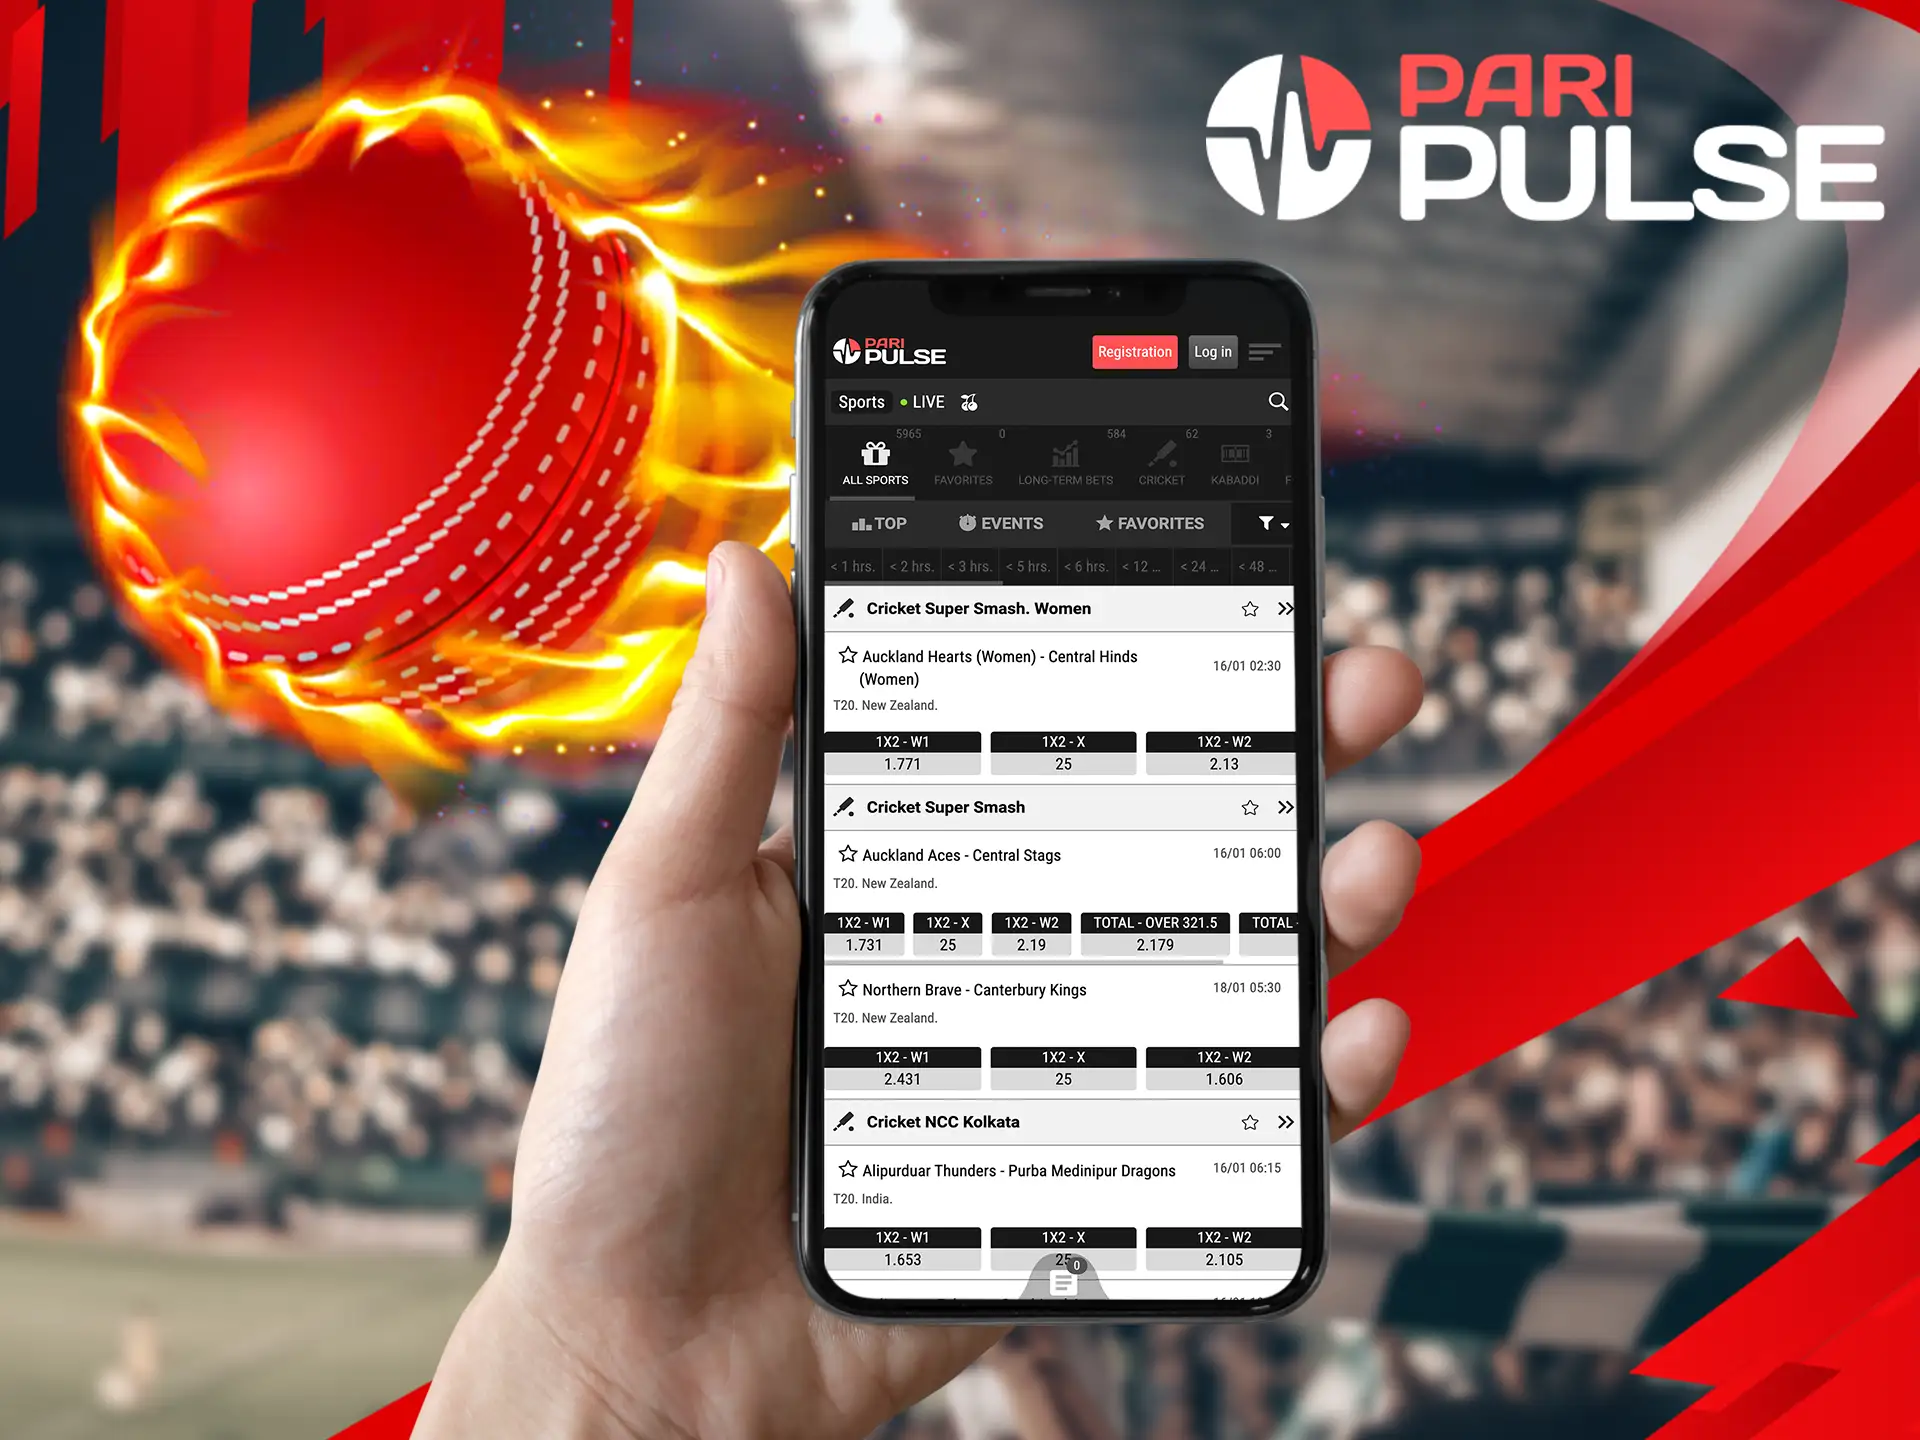 You can enjoy a new betting experience thanks to the modern interface of the PariPulse app.